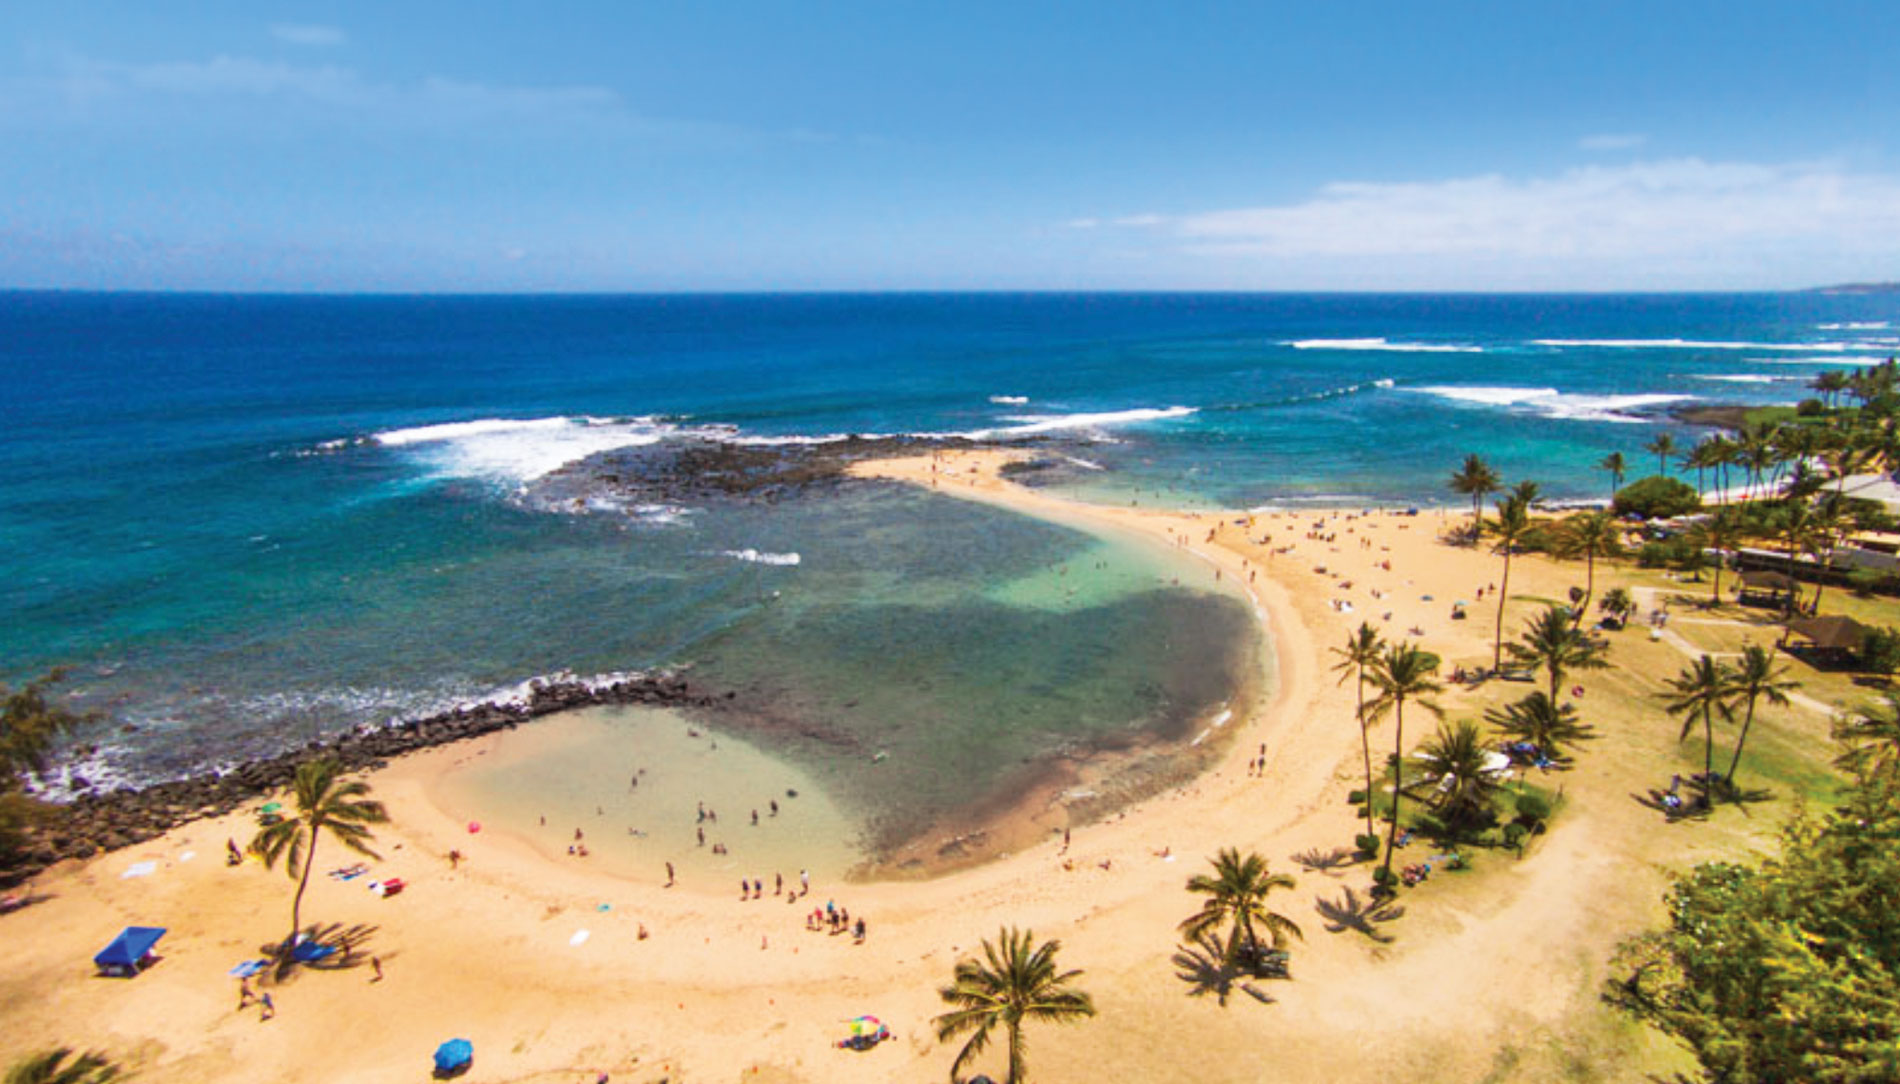 Hawaii's Poipu Beach is shaped like a whale, with a sandy tail extending into the water